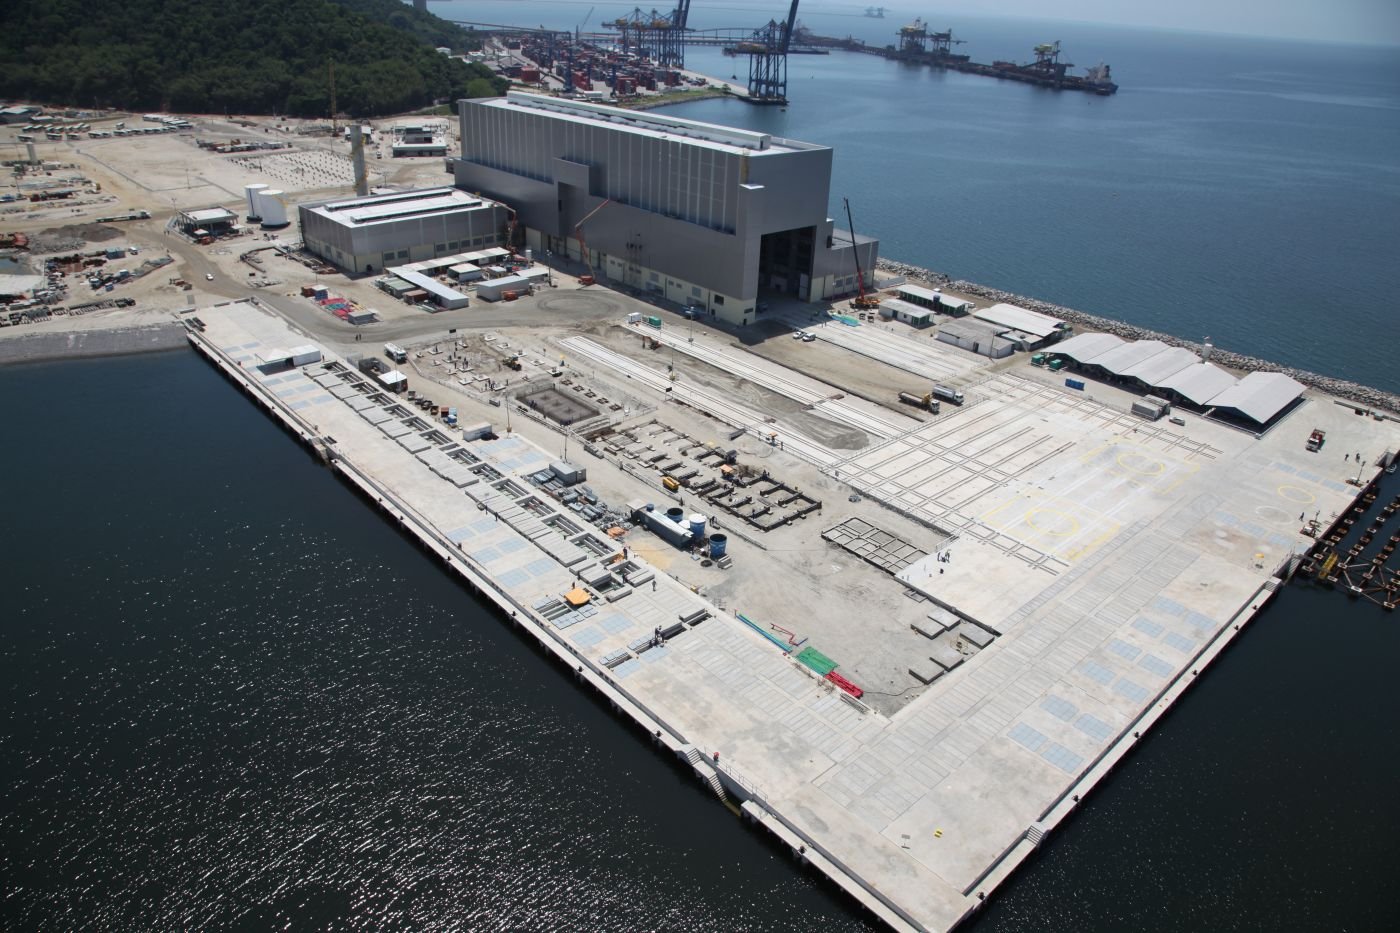 Brazil Develops its First Nuclear Submarine